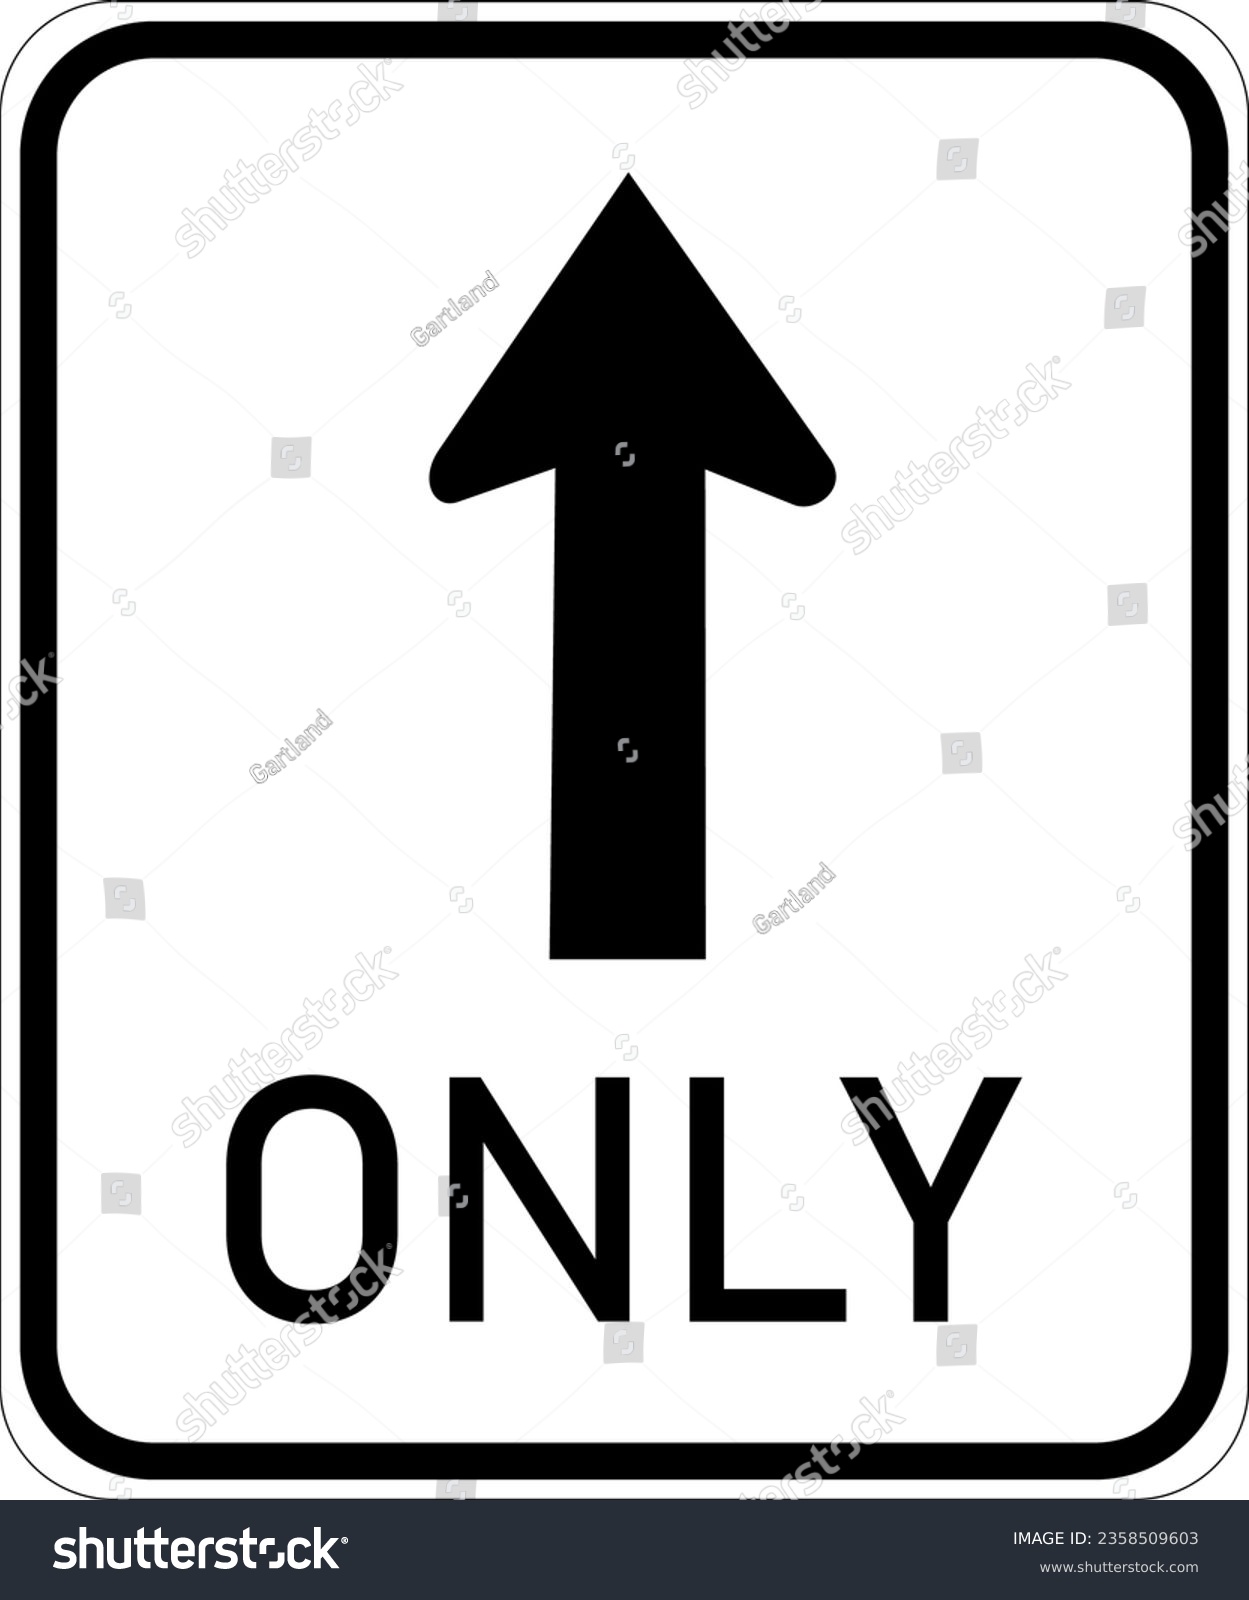 SVG of Vector graphic of a usa straight on only highway sign. It consists of the wording Only, below an upward pointing arrow contained in a white rectangle svg